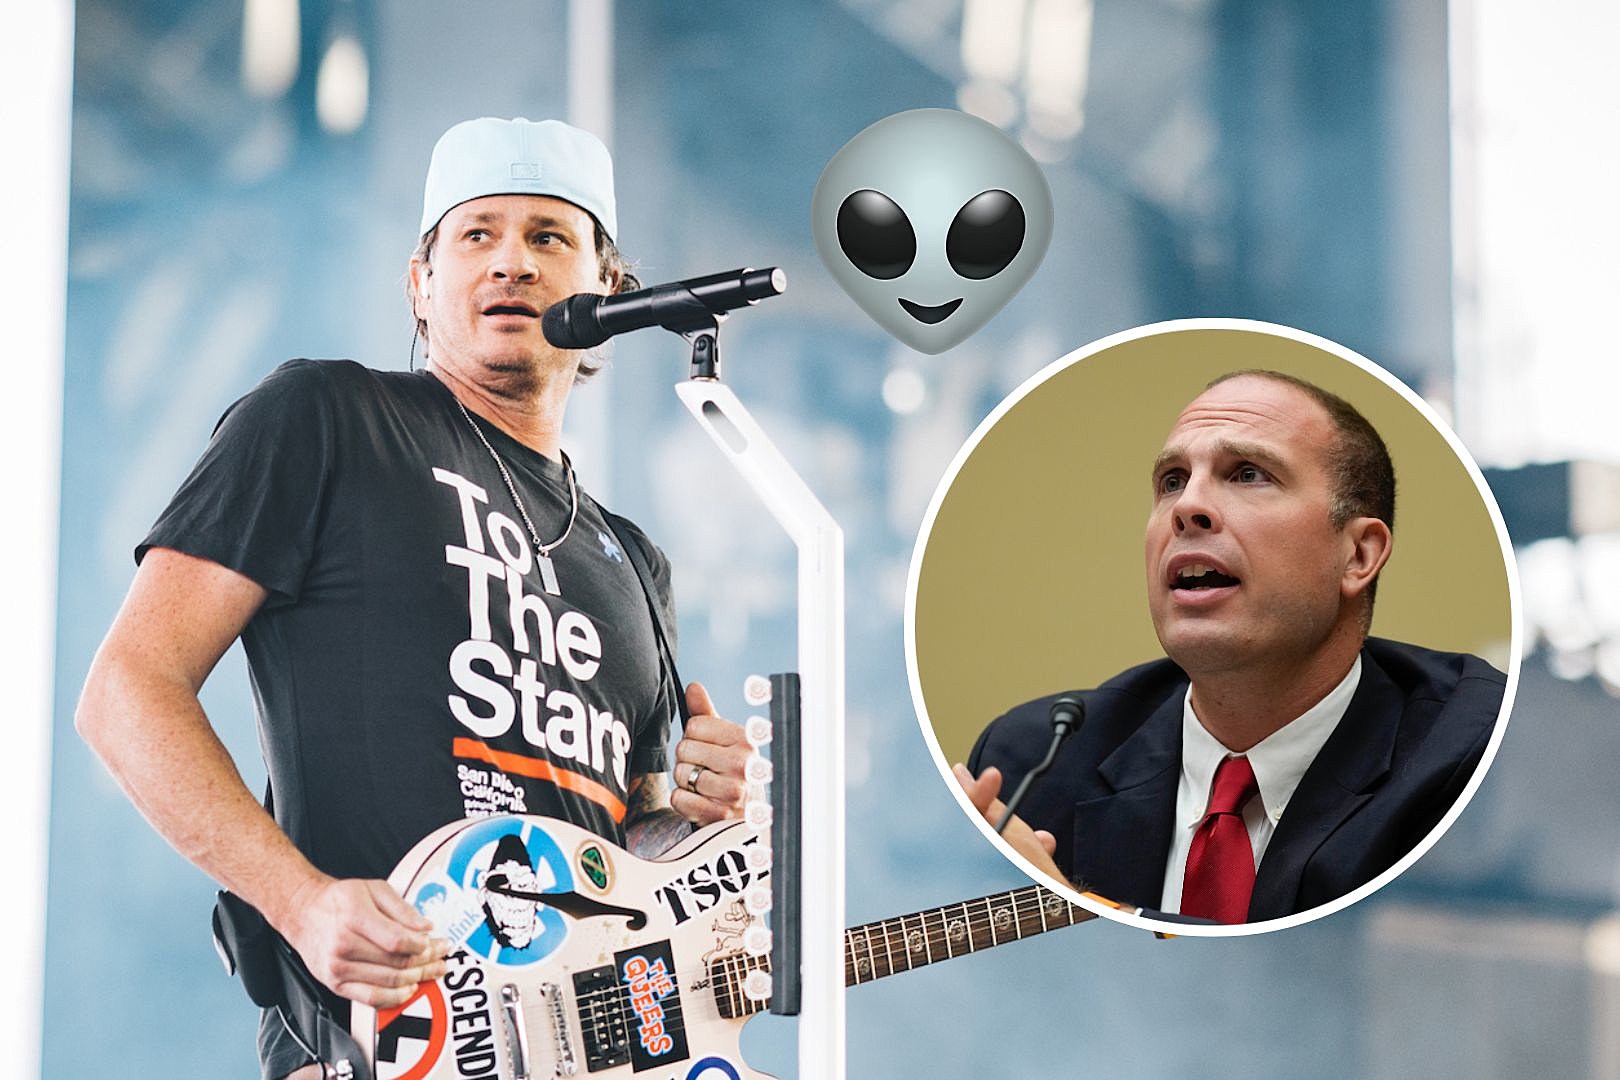 Tom DeLonge Responds After UFO Remains Are Confirmed 'Nonhuman'